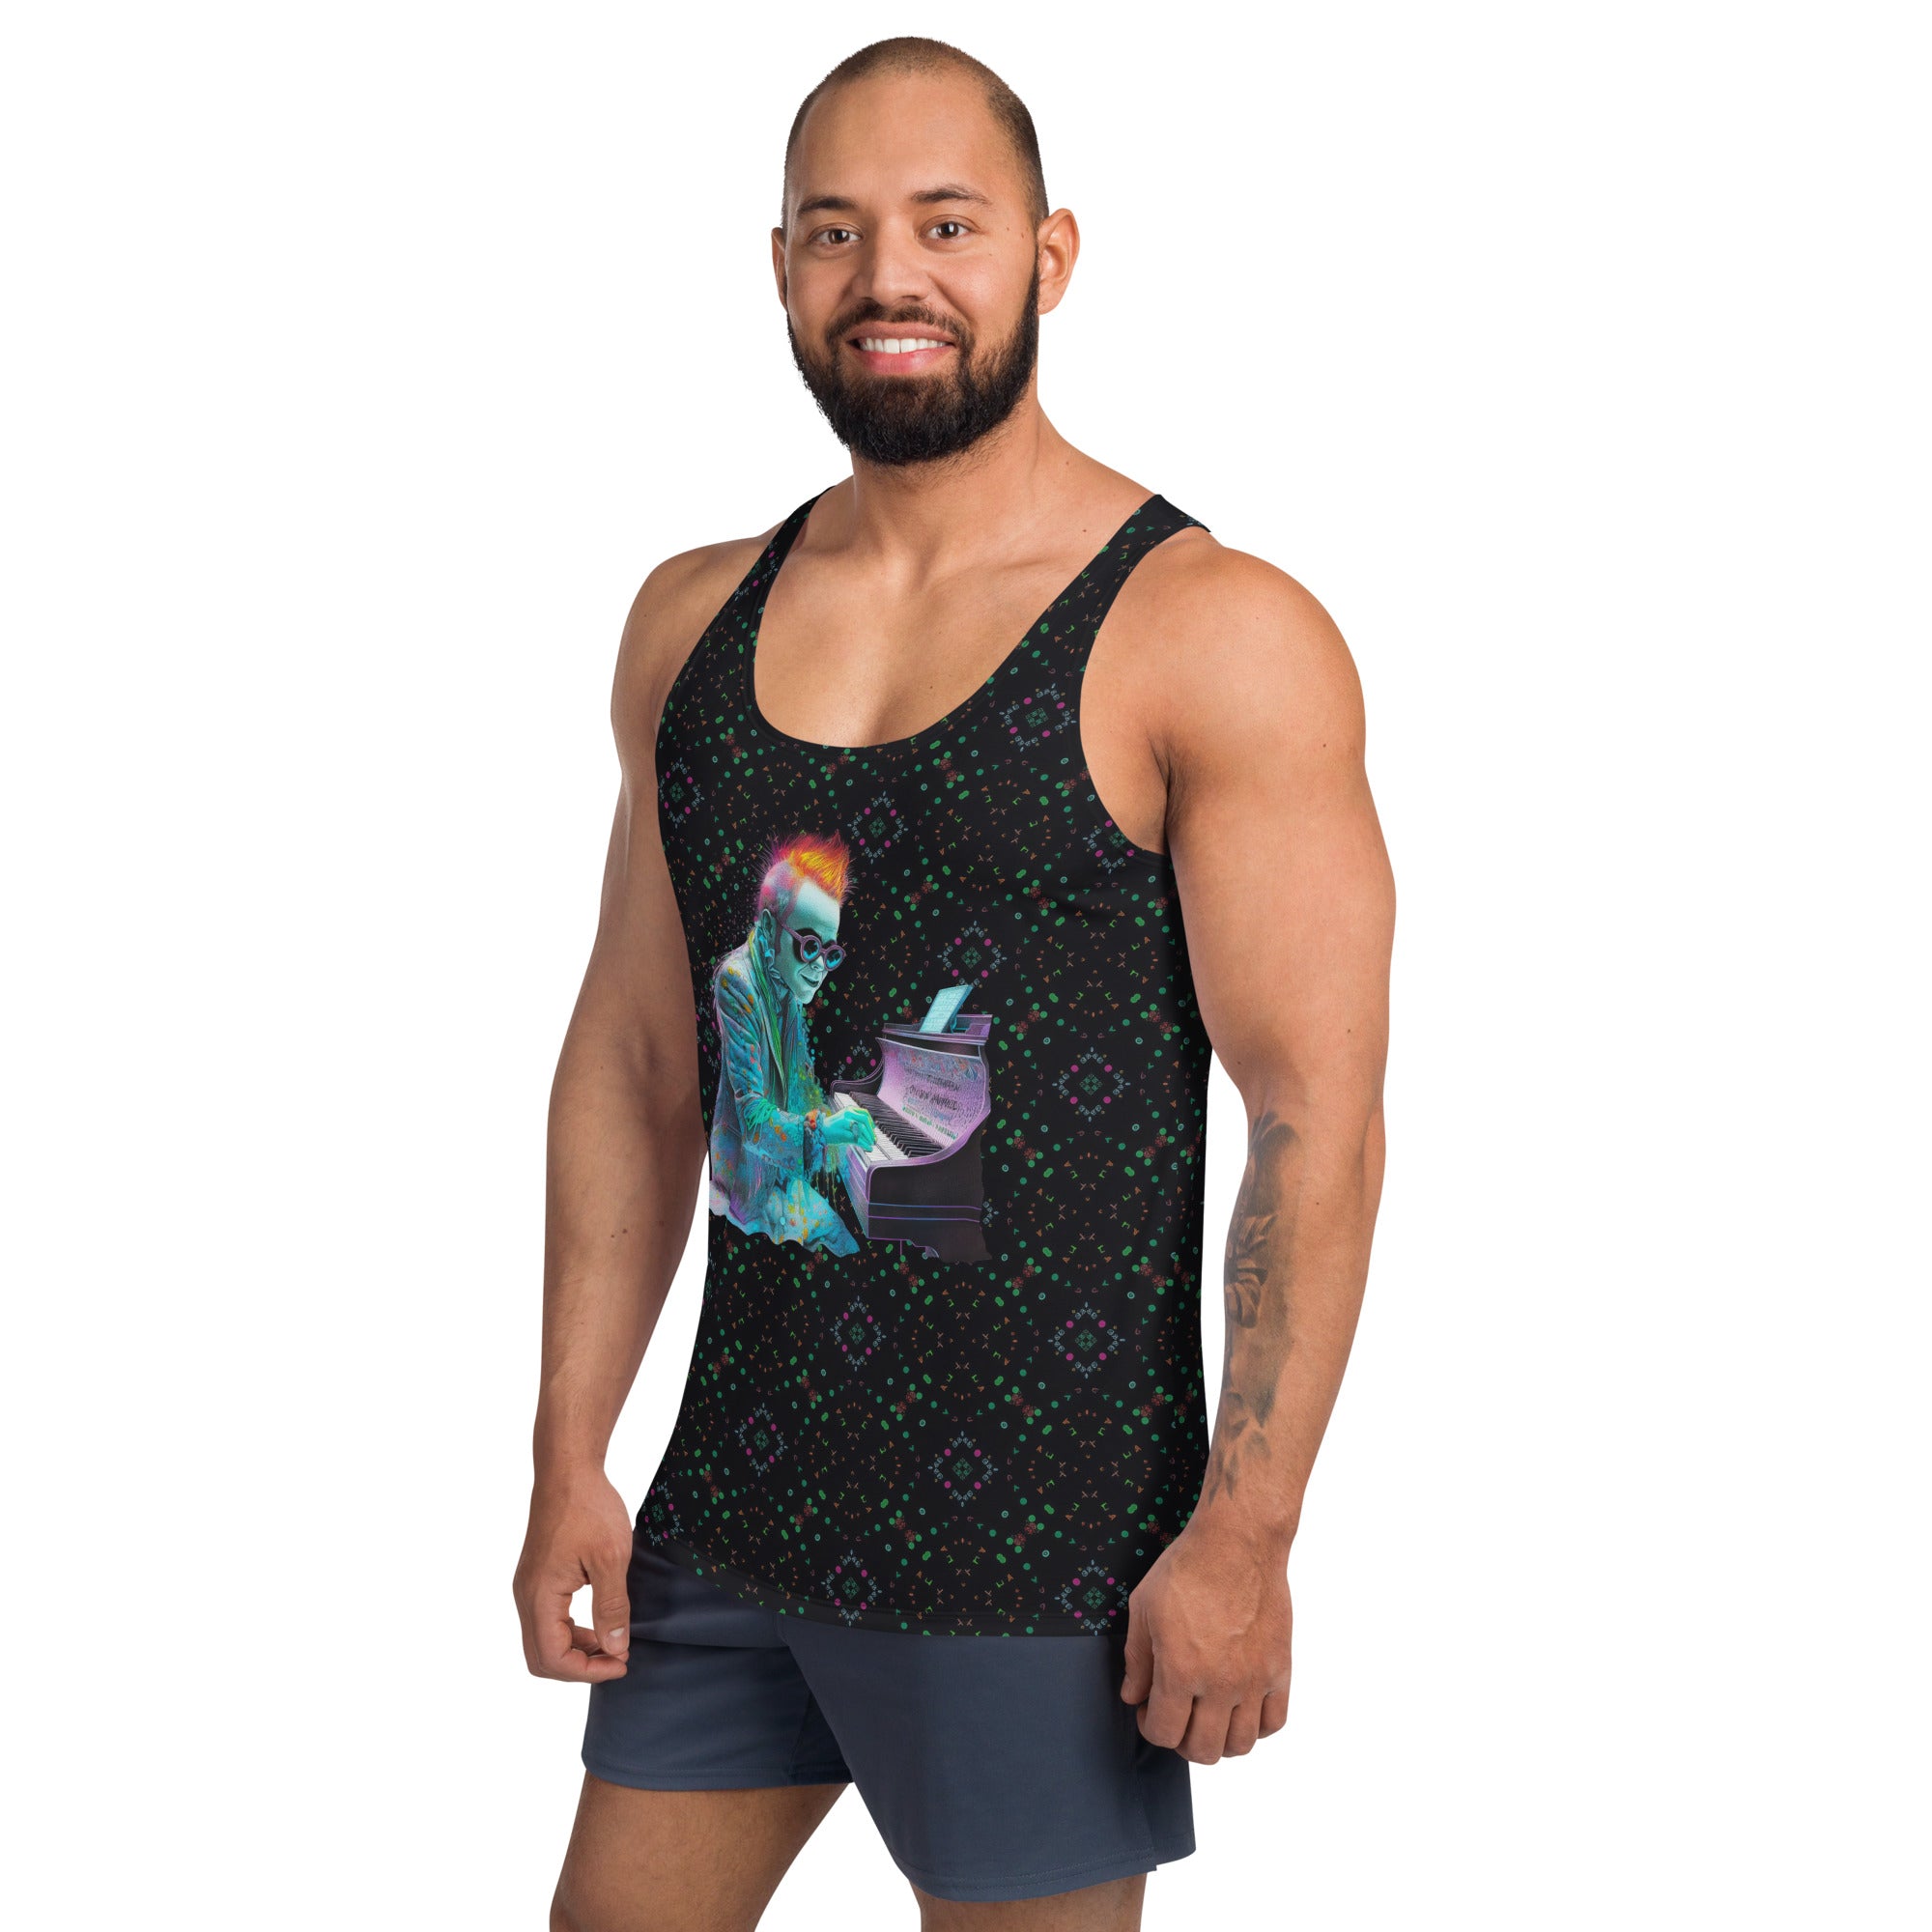 Men's tank top with bold psychedelic patterns - summer festival wear.